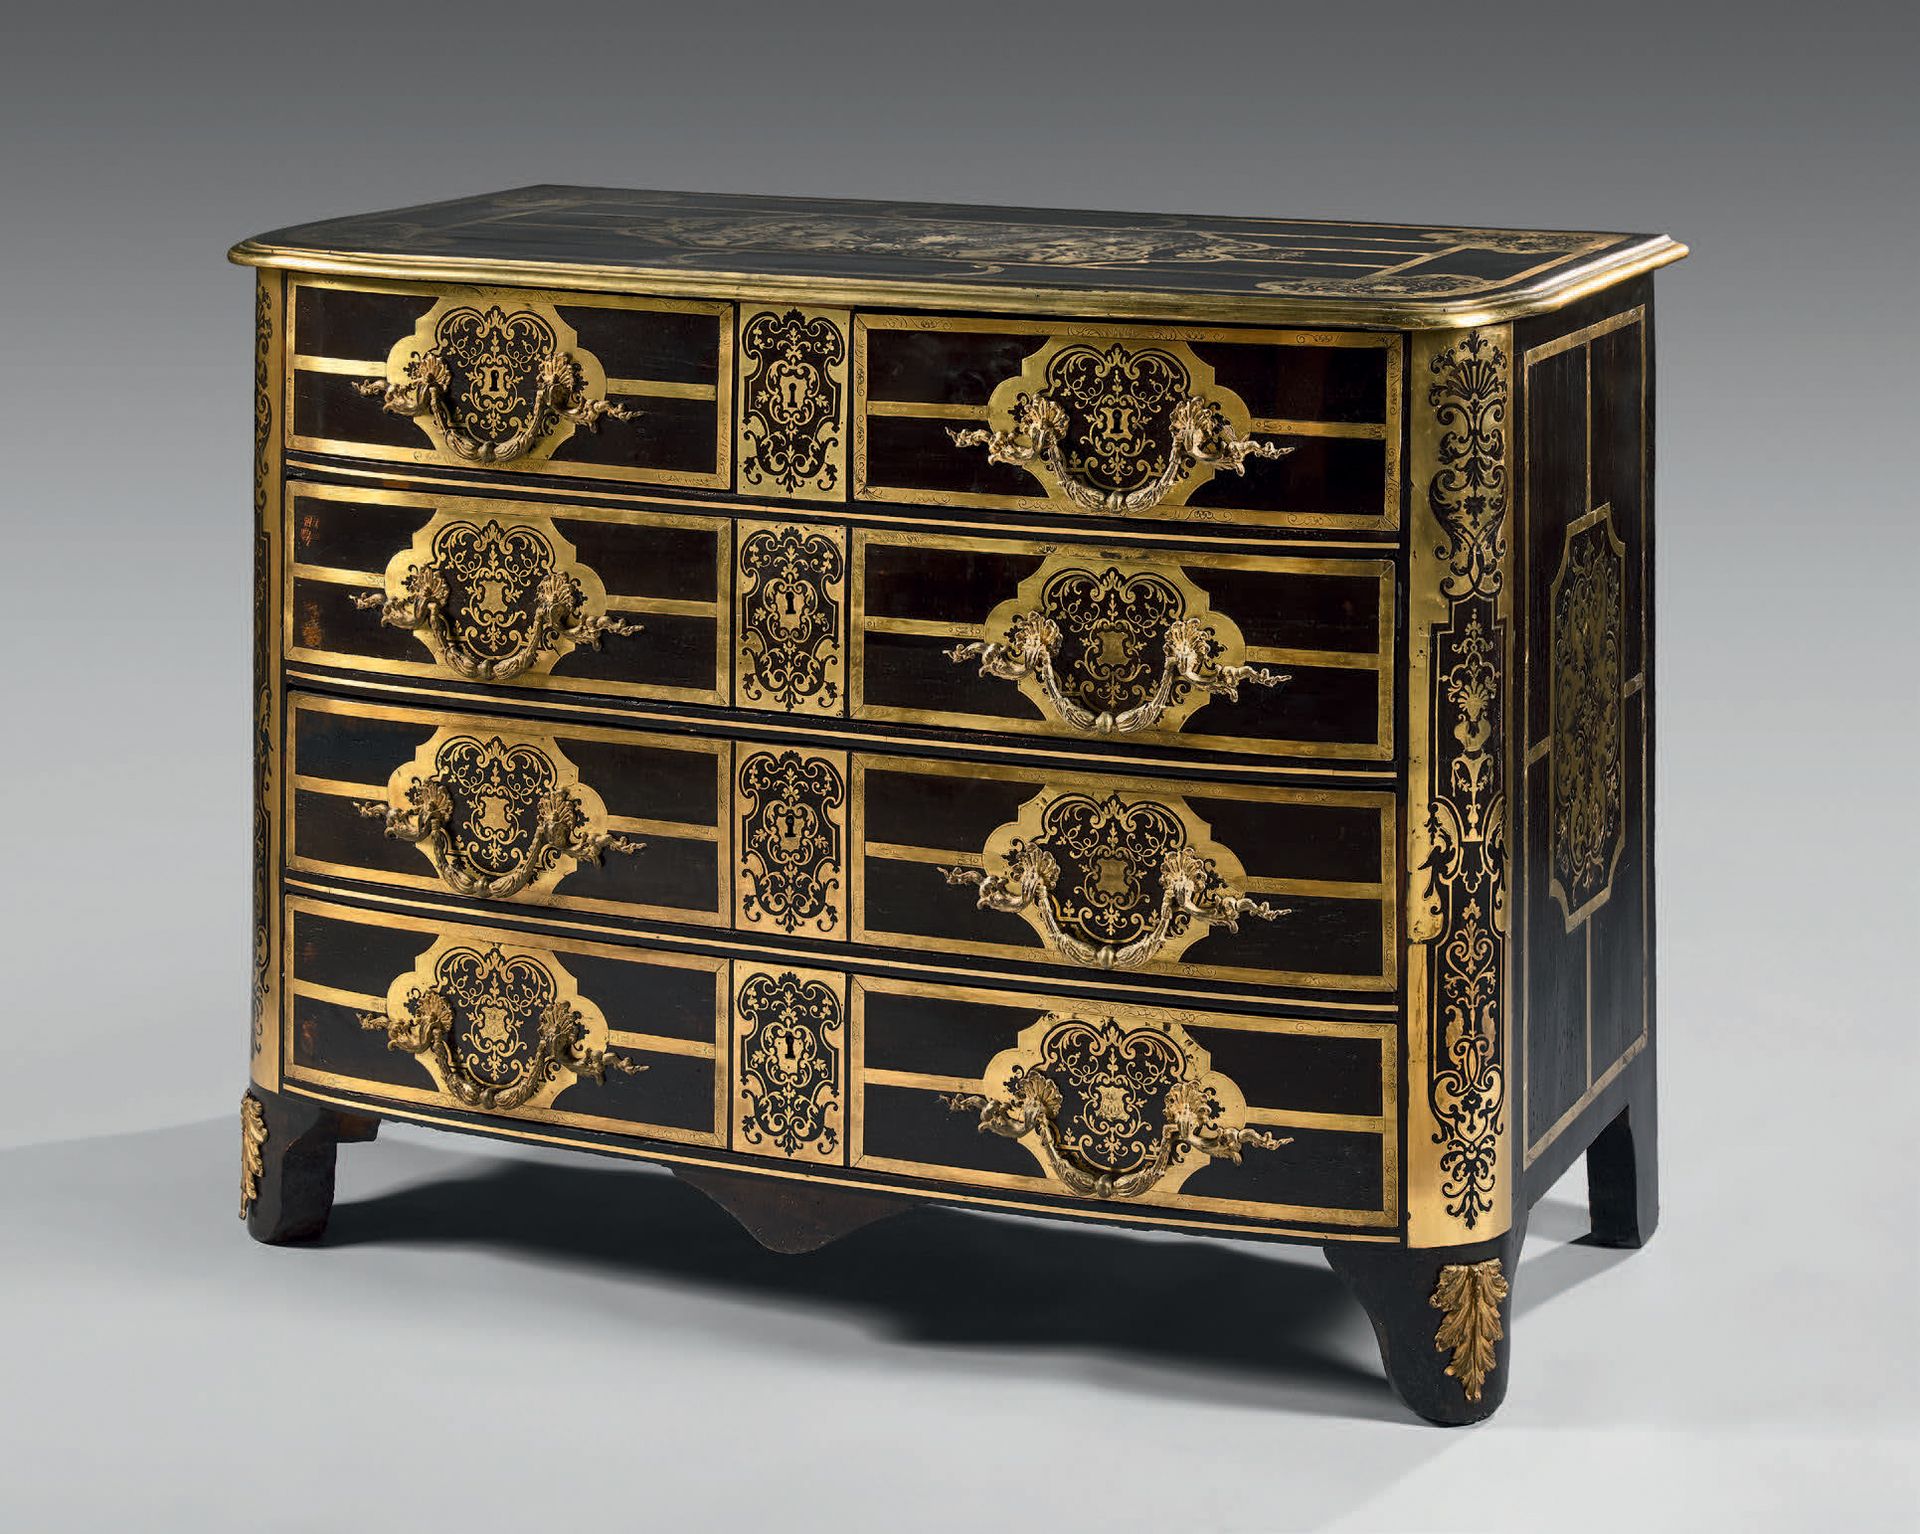 Null A blackened ebony veneer chest of drawers with brass and engraved brass mar&hellip;